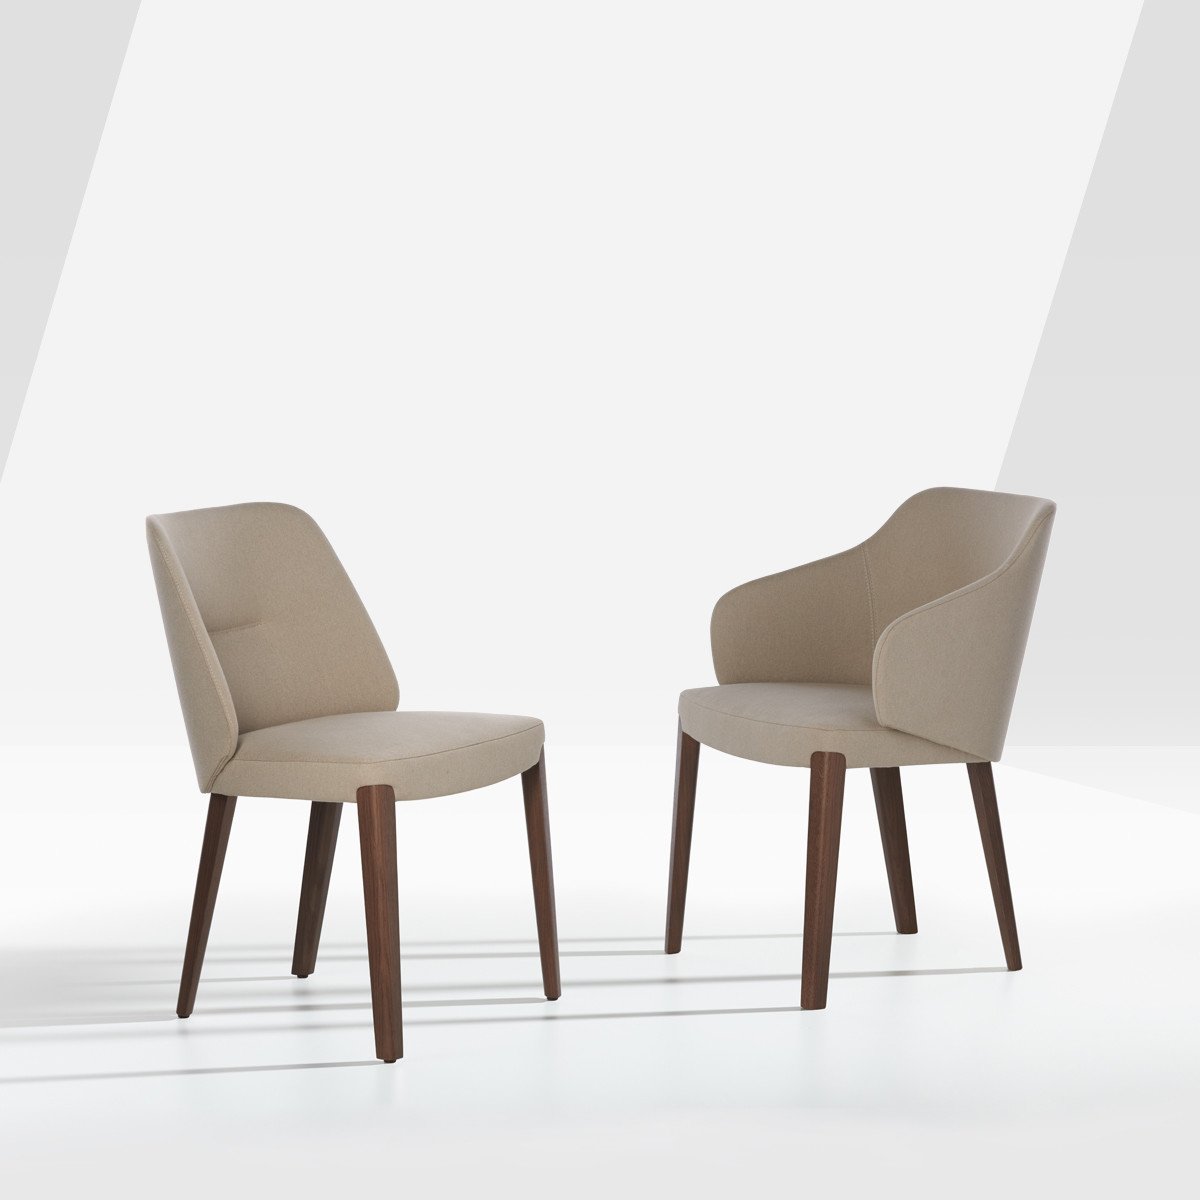 Concha Chair from Potocco, designed by Stephan Veit